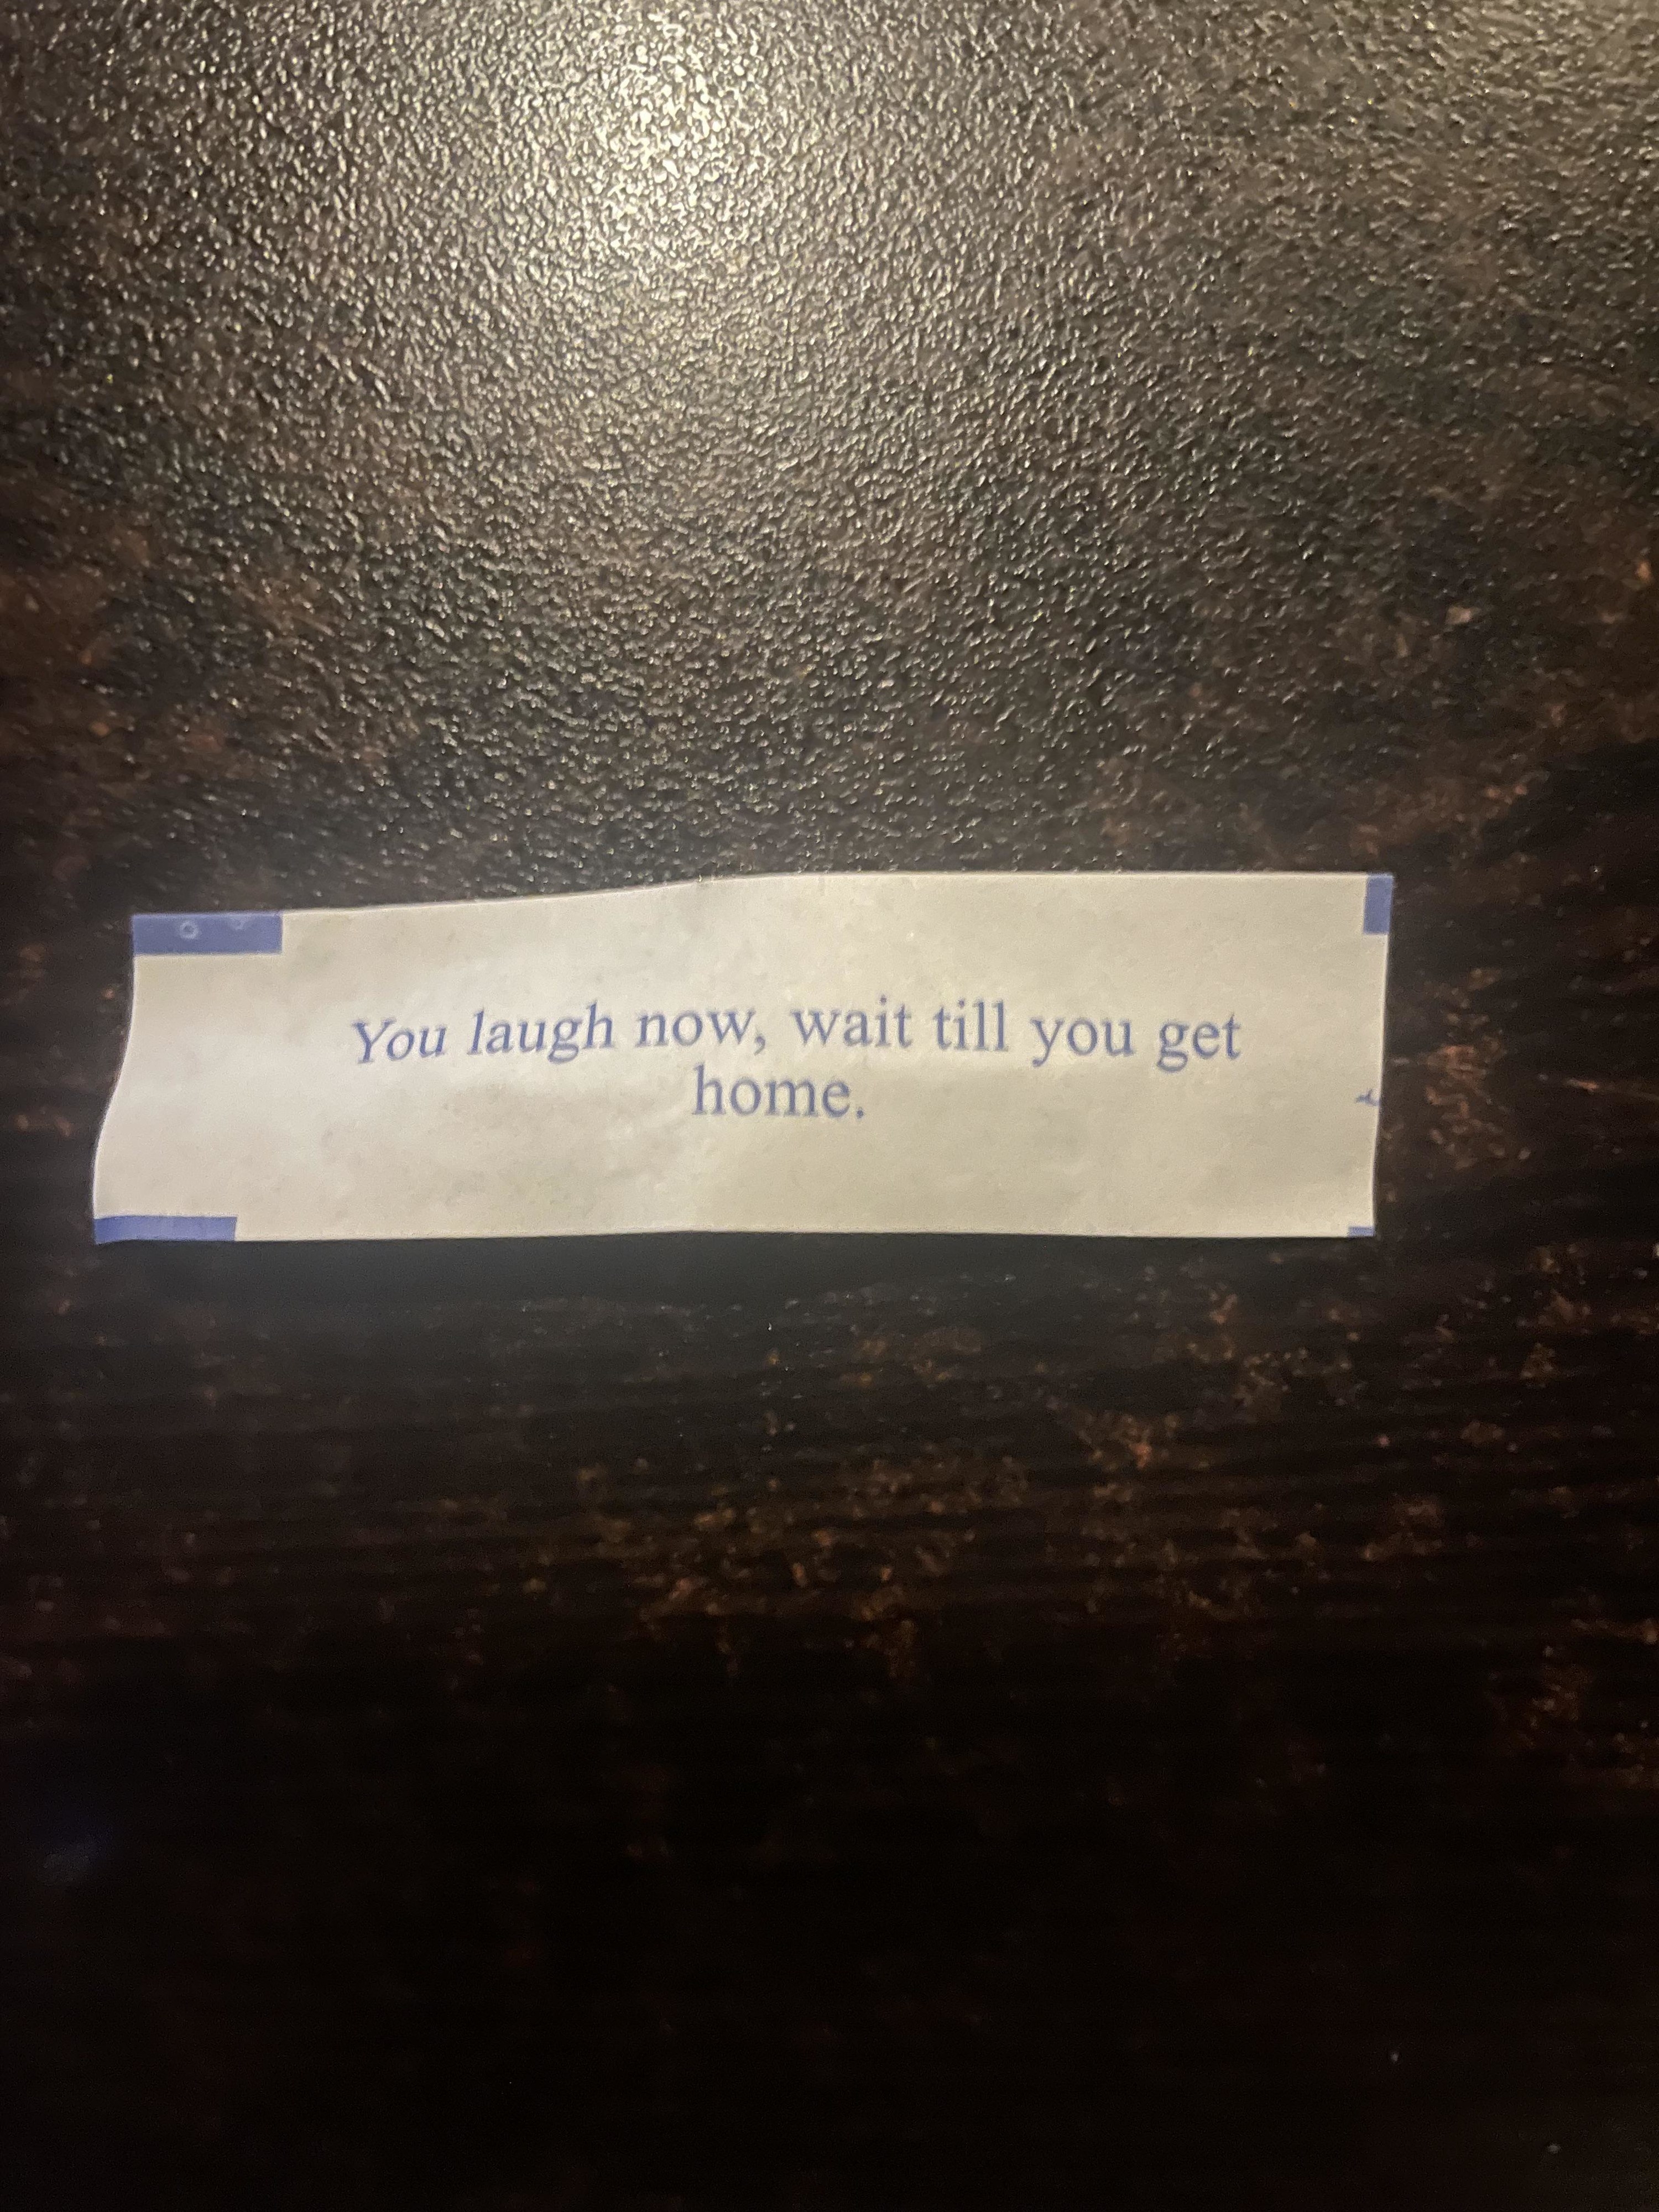 A fortune cookie fortune